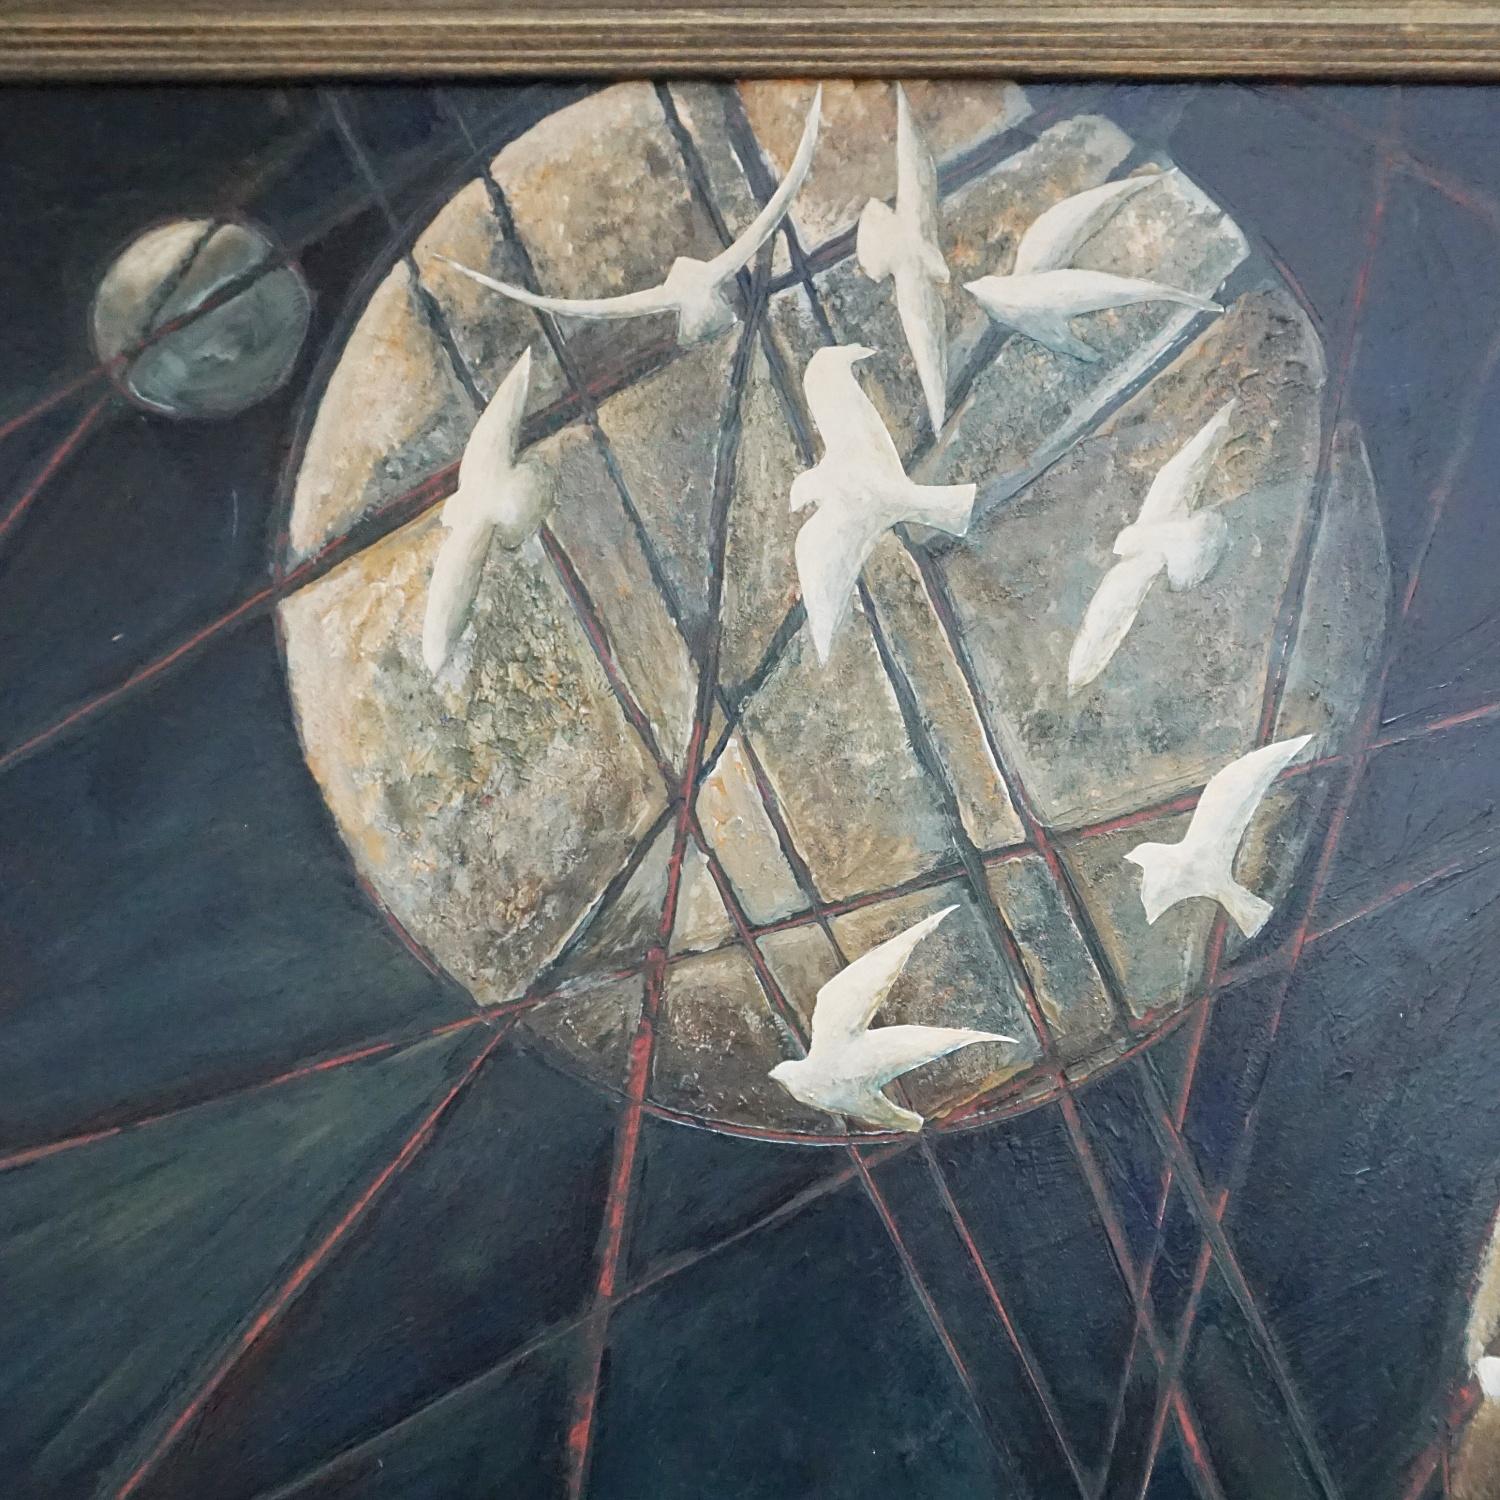 An Art Deco Style Contemporary painting by Vera Jefferson depicting groups of white doves collecting around abstract moons. Signed V Jefferson to lower right. 

Vera Jefferson trained at Goldsmiths College, London and went on to teach Art to